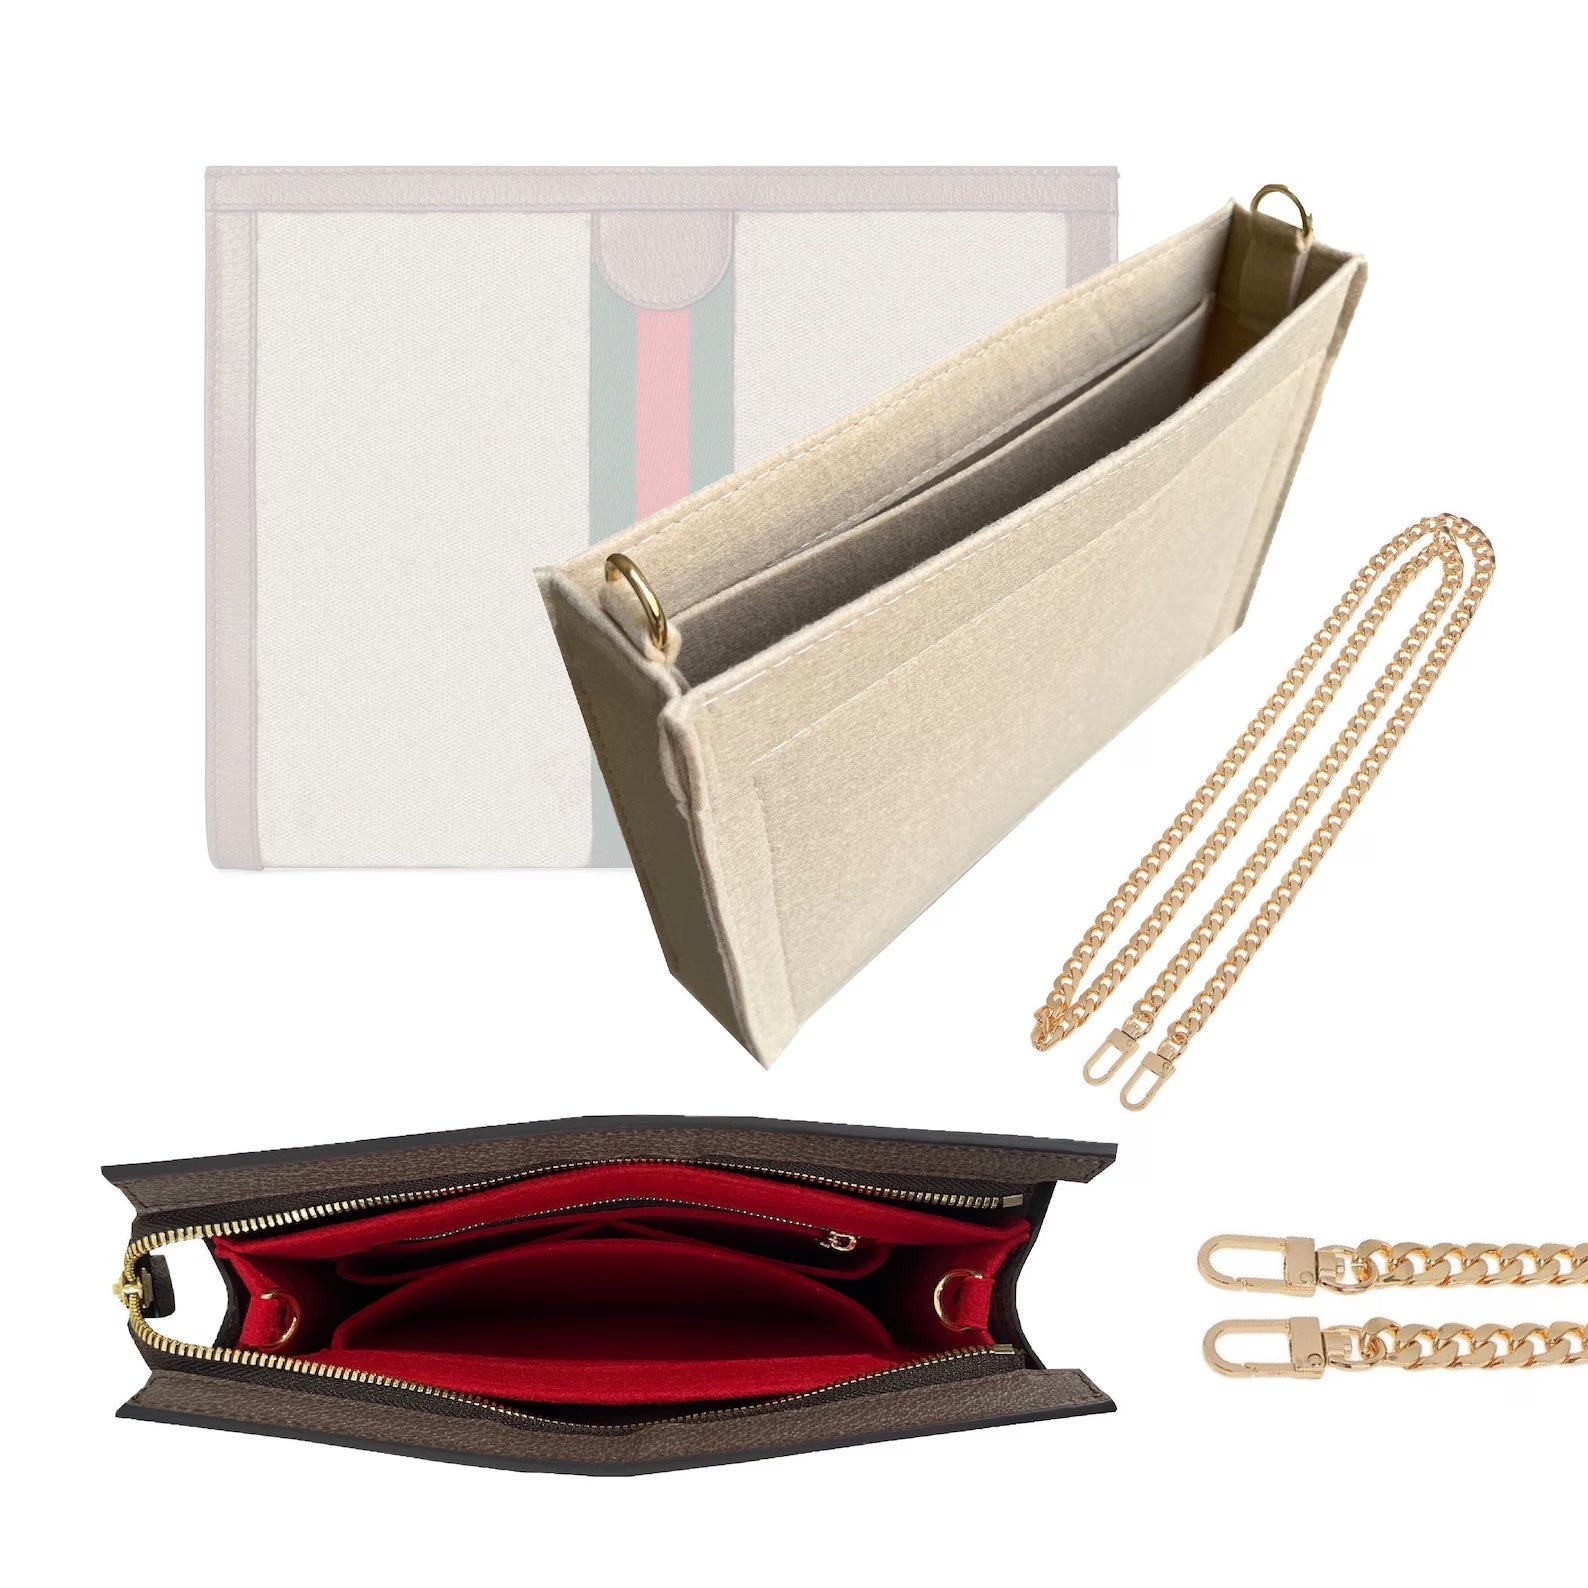 Conversion Kit for Ophidia Pouch (with gold or silver chain)| Accessory for Gucci Swing | Gucci Strap | Designer Purse Insert | Gucci Handbag Strap | Bag Insert Organizer | Gucci Swing Strap | Luxury Bag Accessory | Bag Protector”